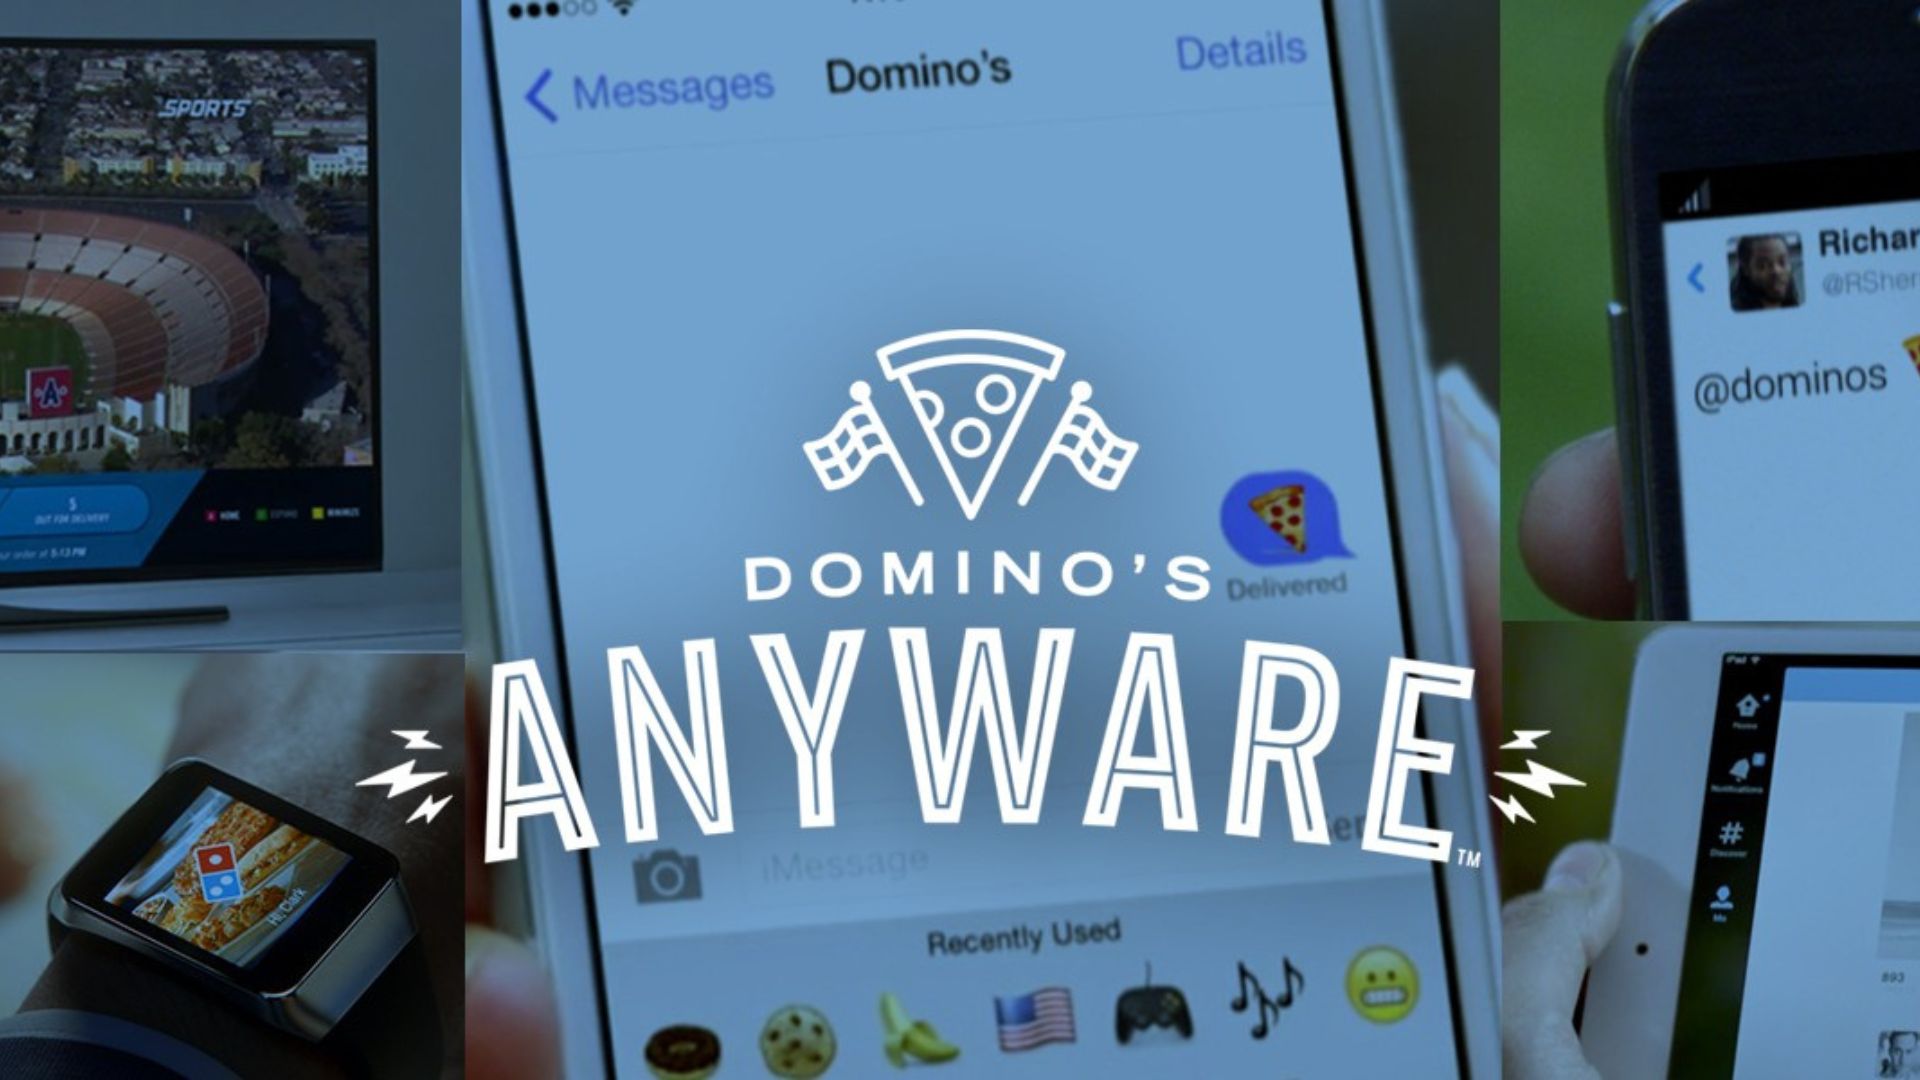 chiến dịch anyware của domino